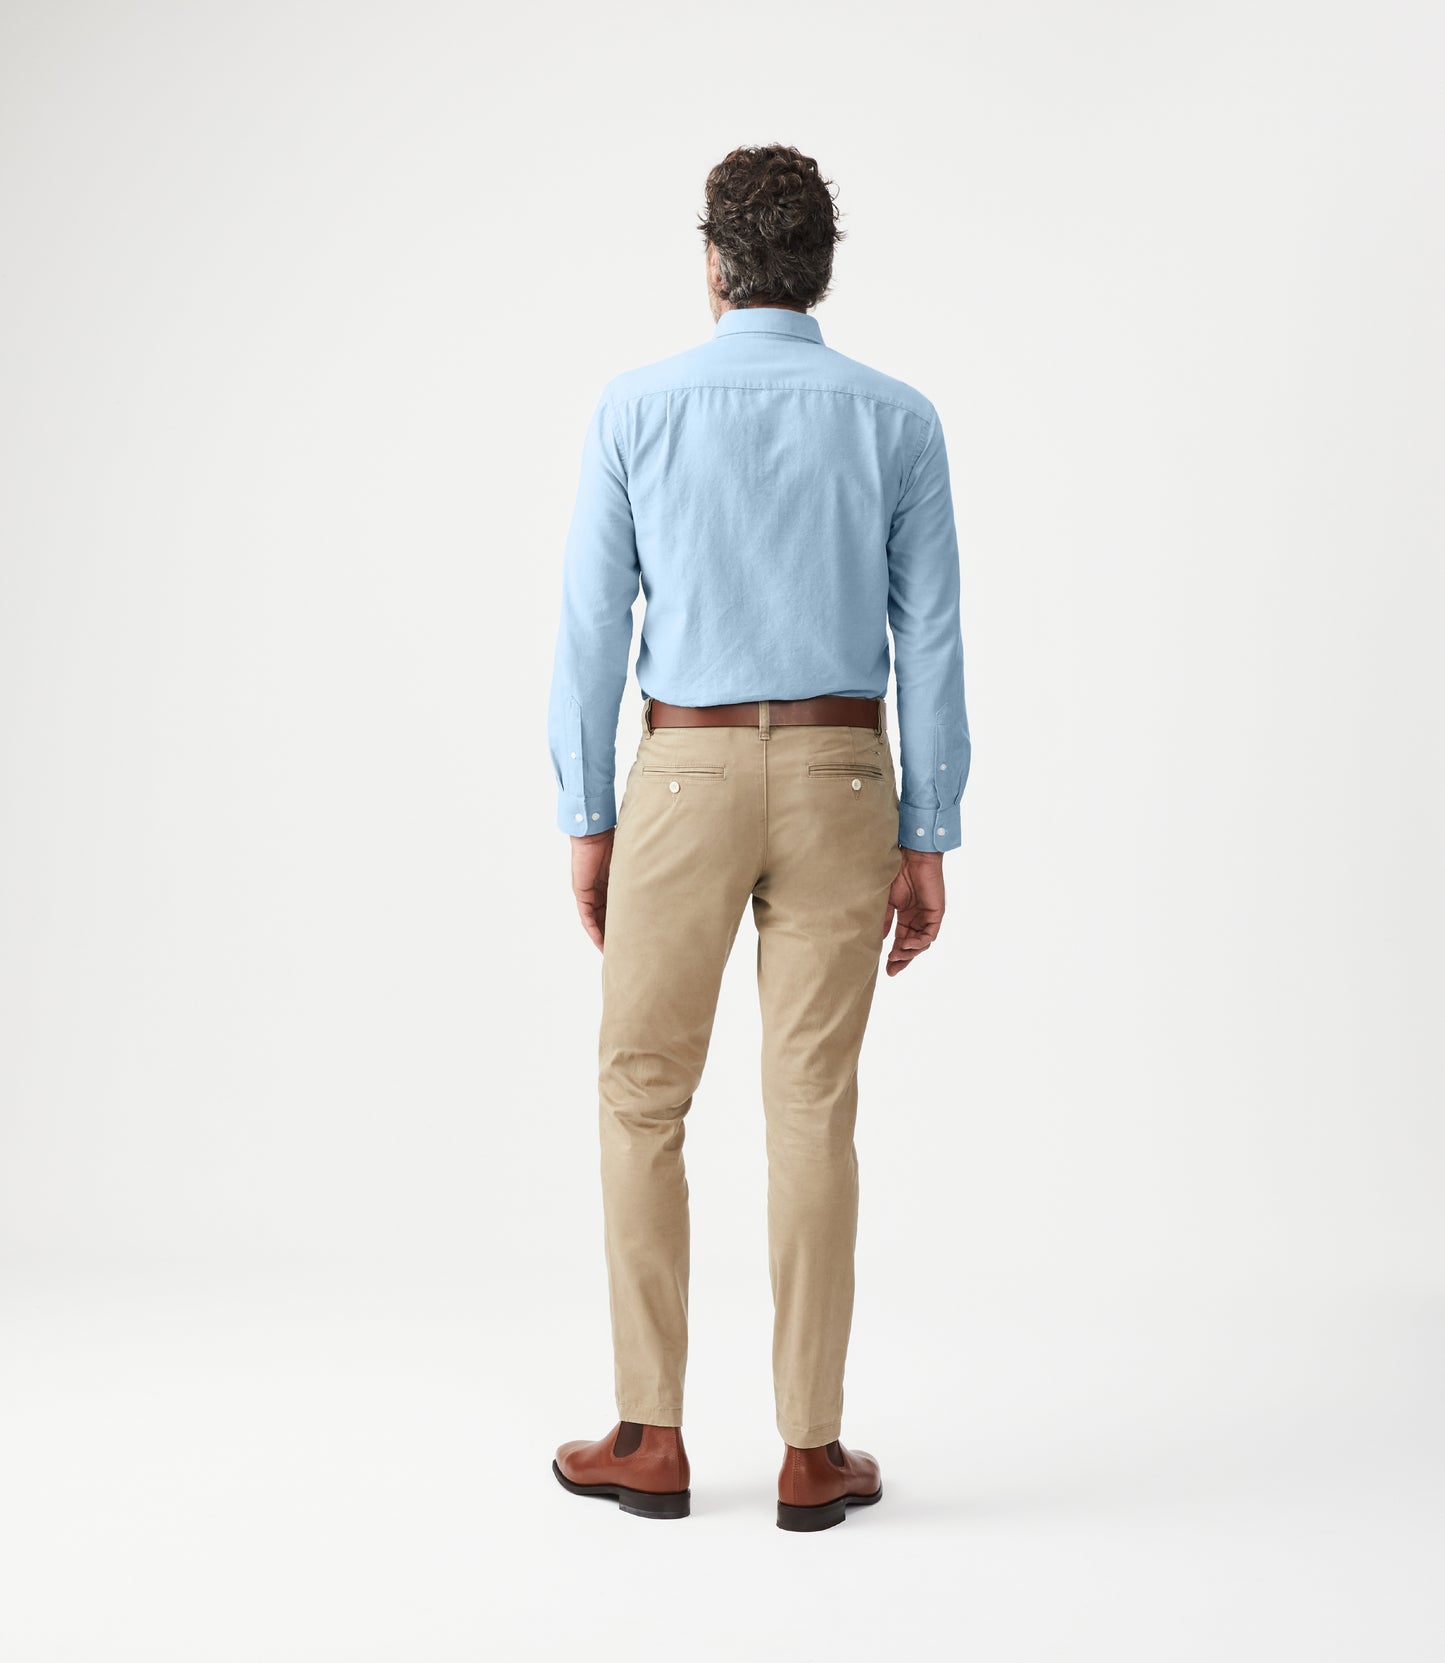 R.M. Williams, the Collins Button Down Shirt in Light Blue